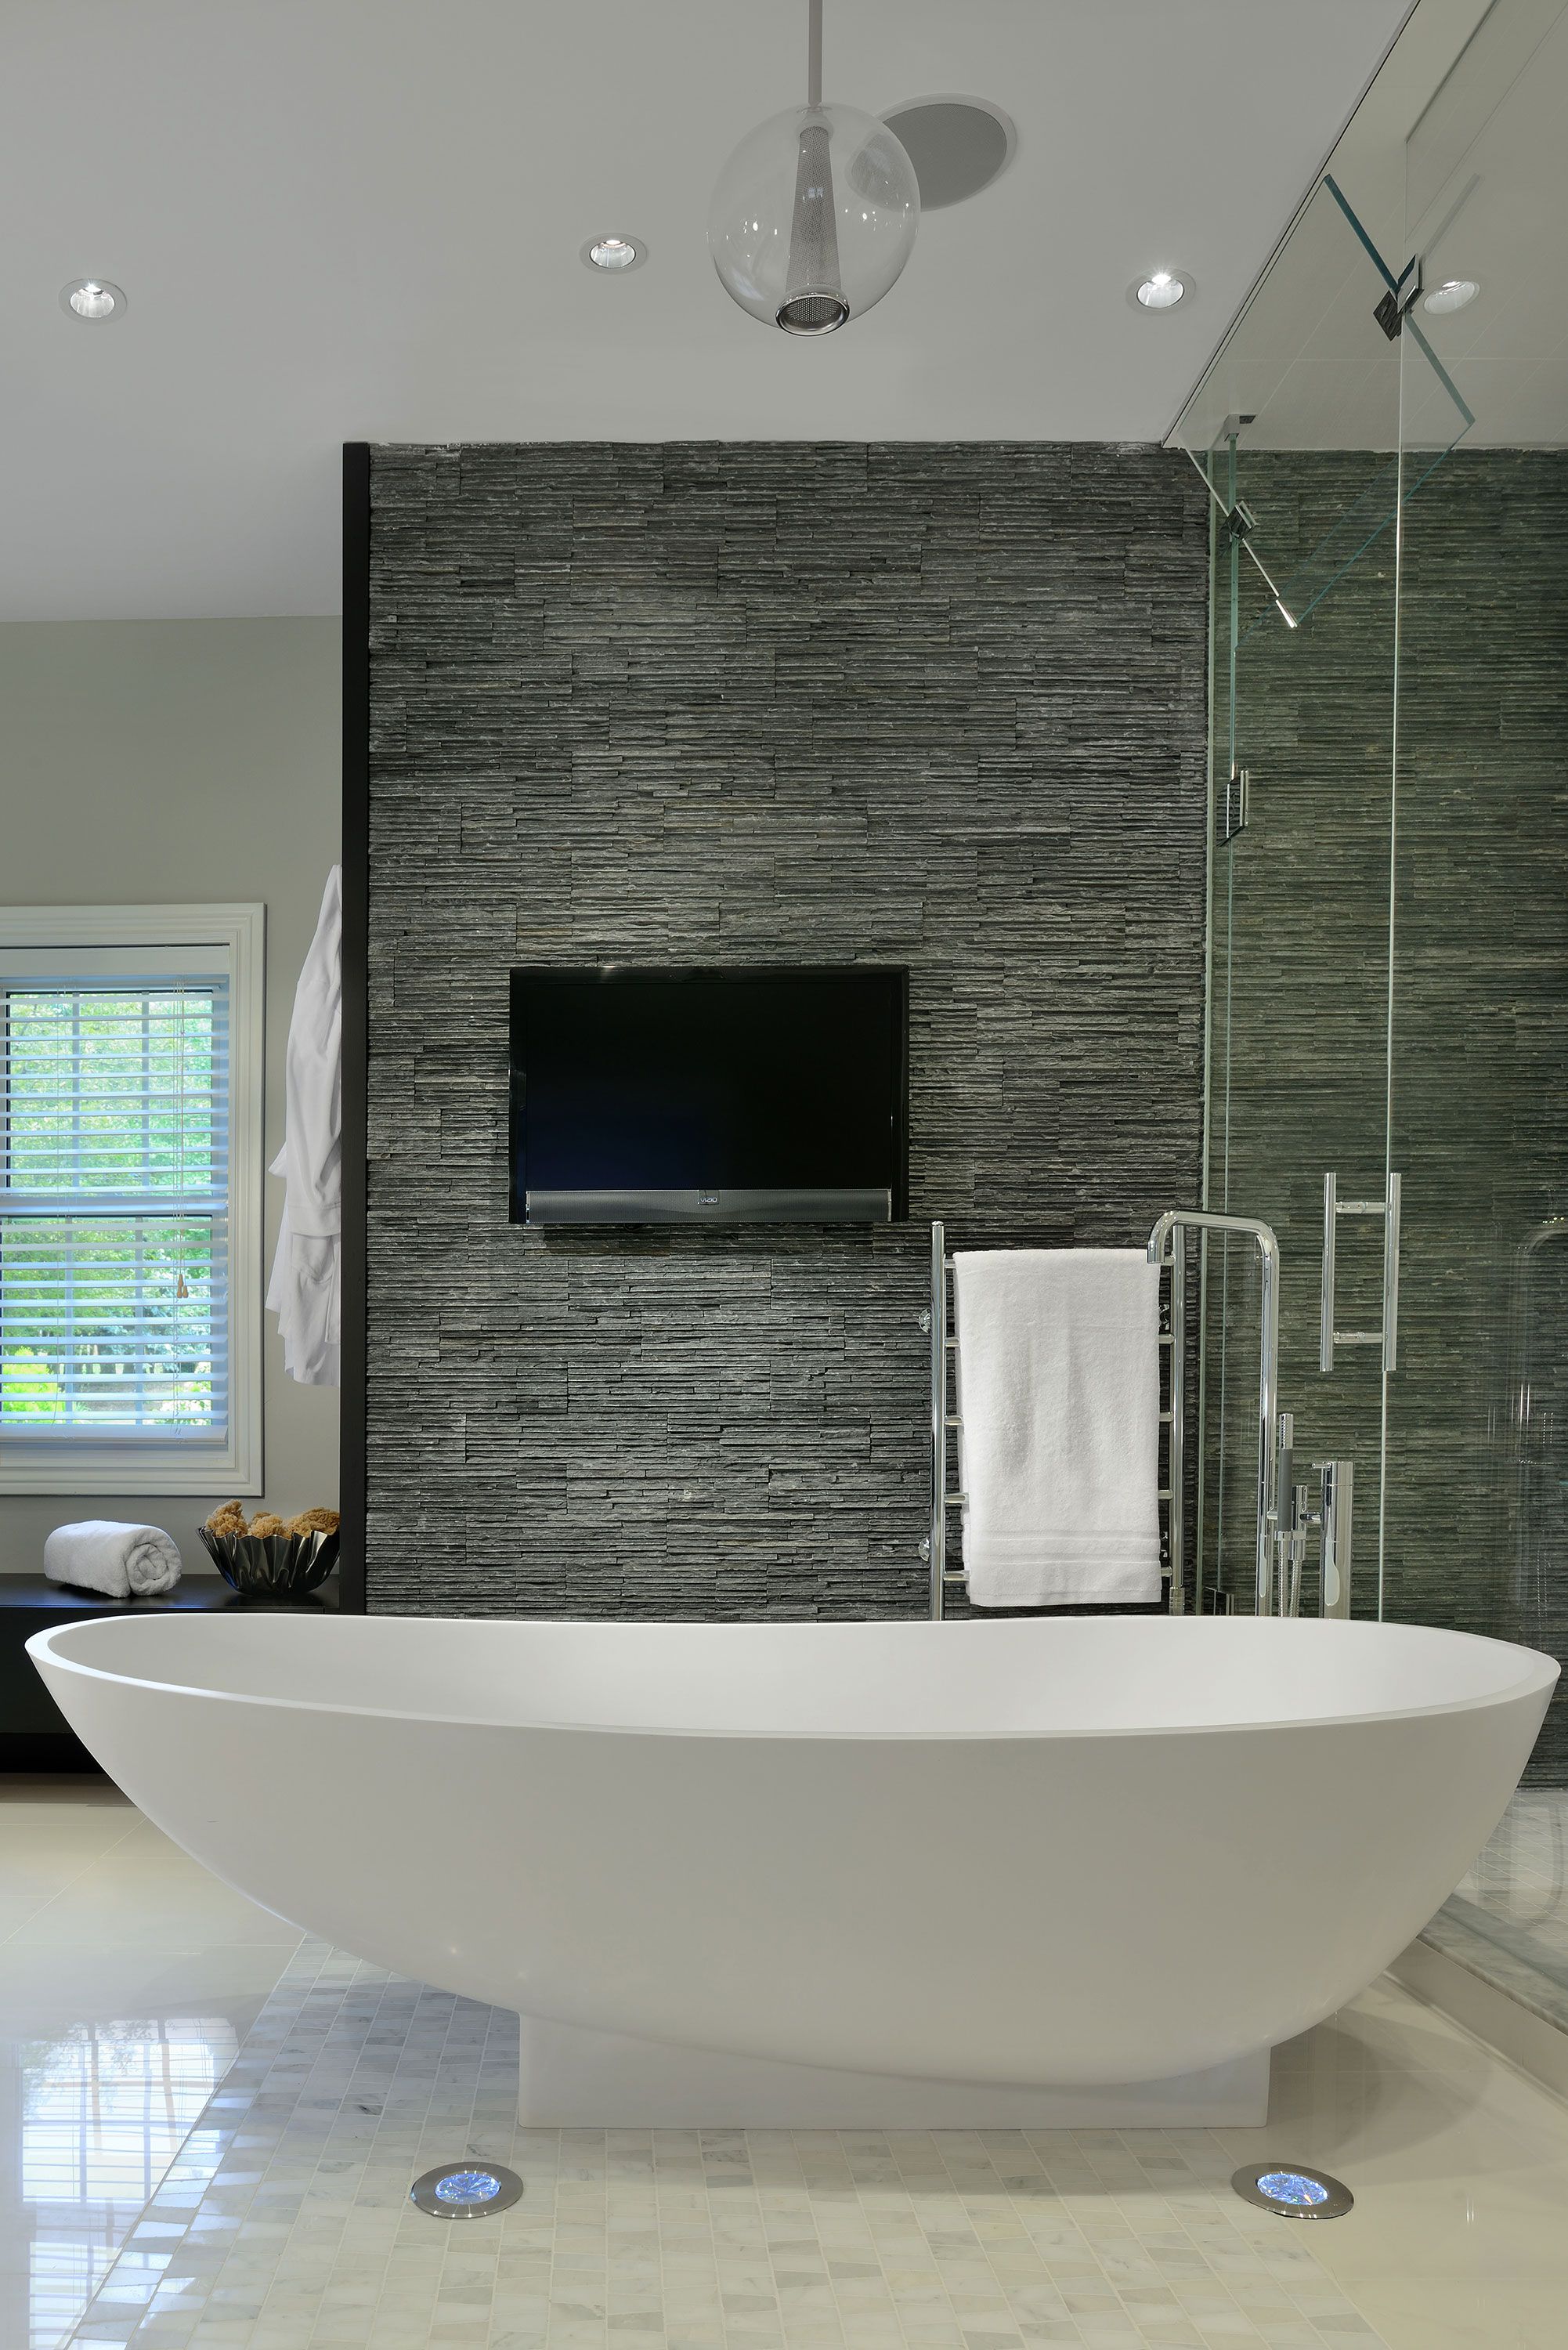 10 Freestanding Bathtub Ideas That'll Have You Dreaming in Bubbles